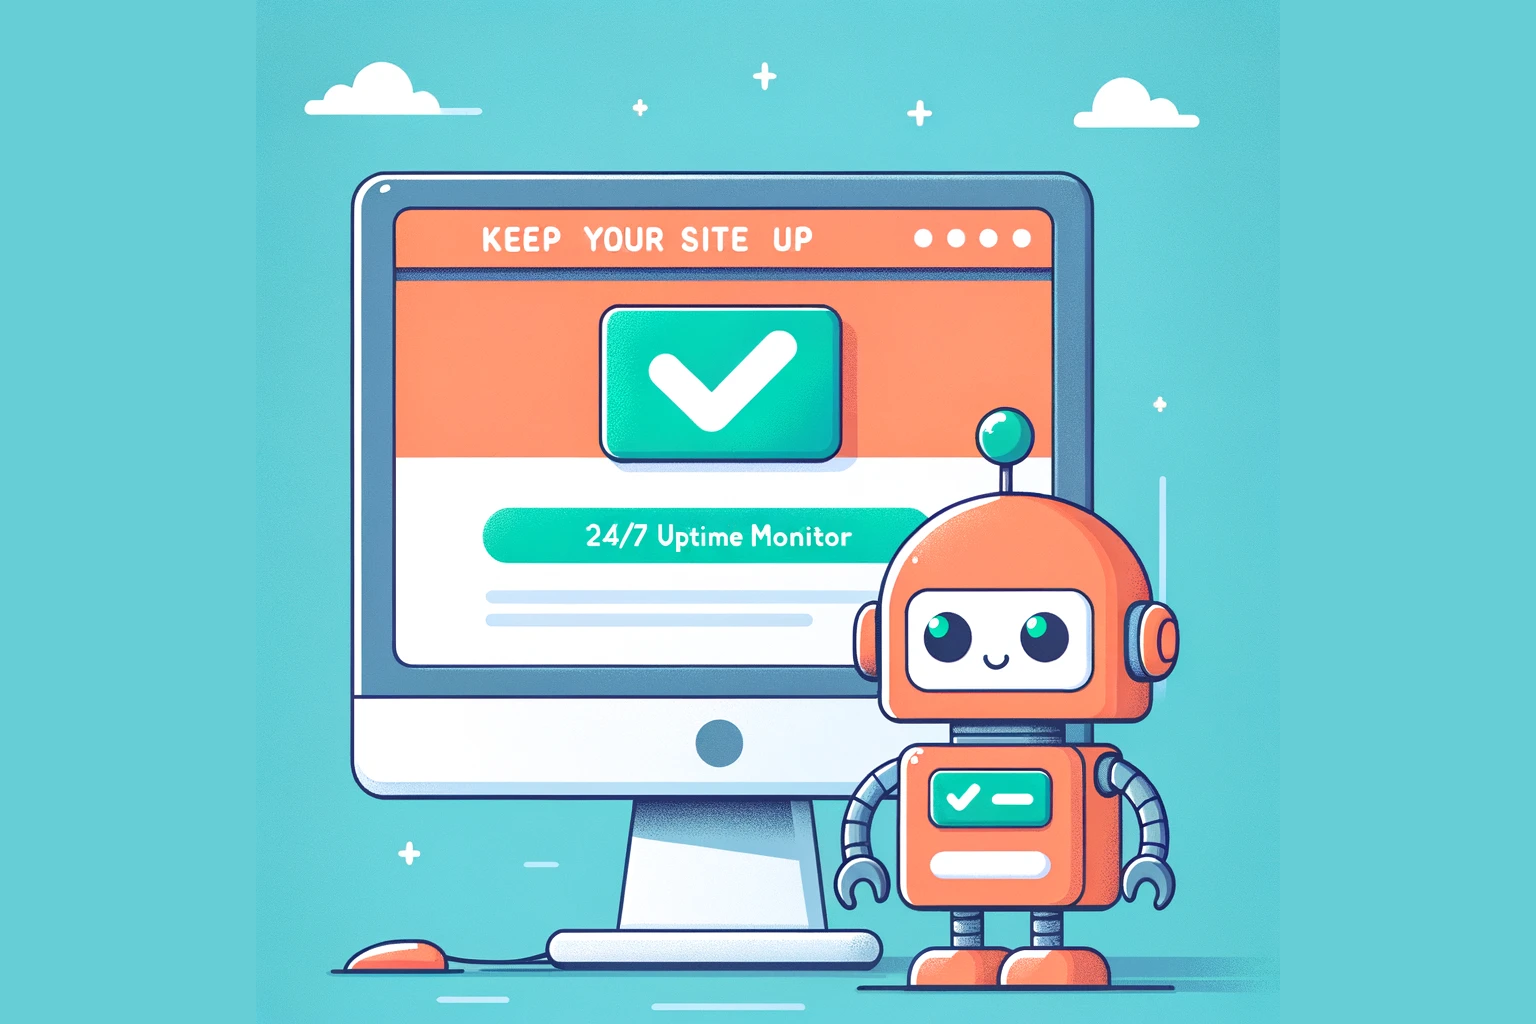 Keep Your Site Up with BotFleet: Your 24/7 Uptime Monitor